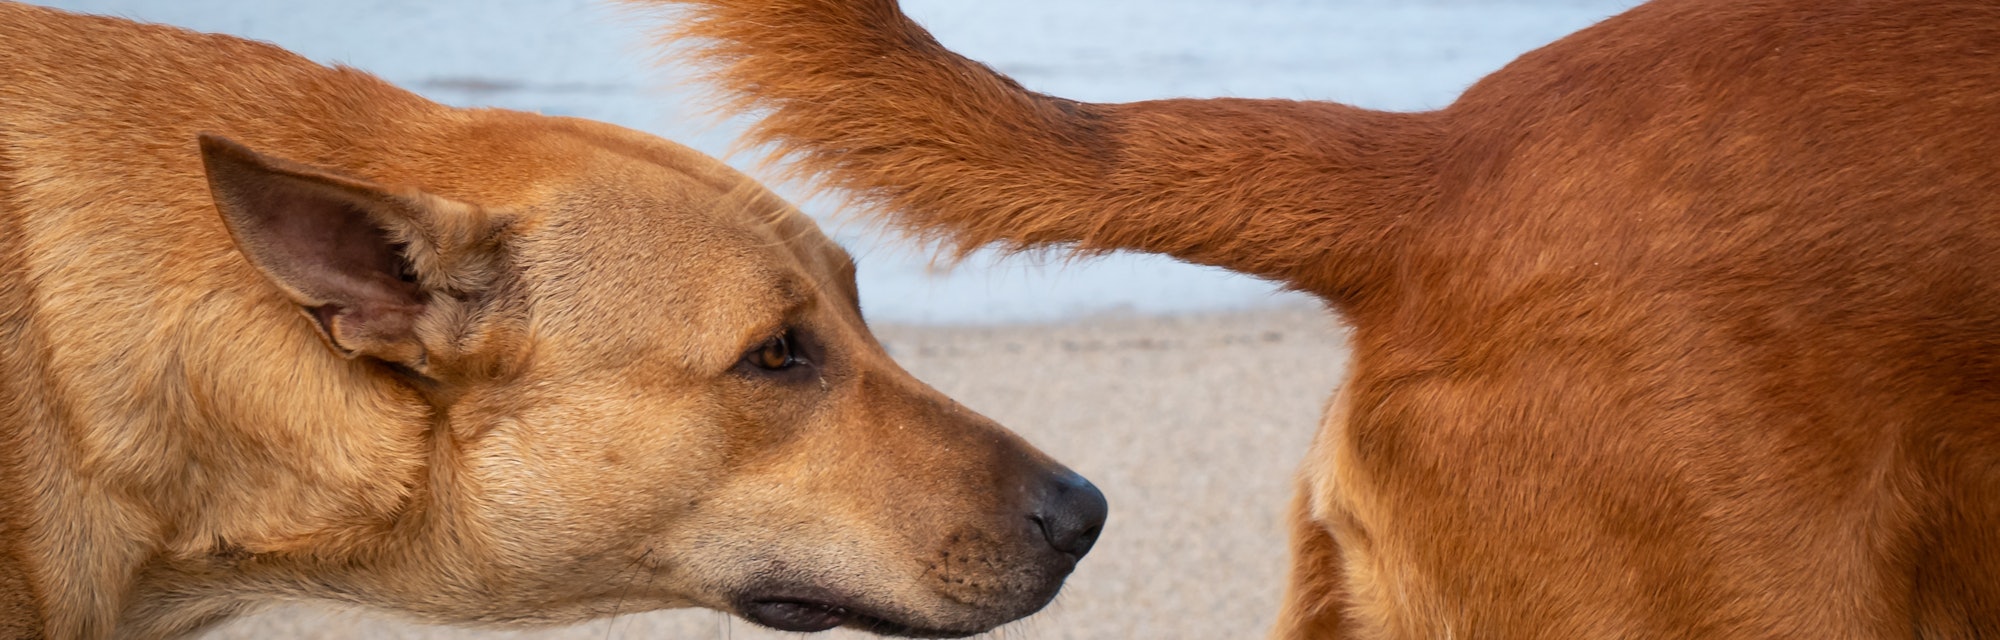 Dog Sniffs the Tail of Another Dog on the Beach